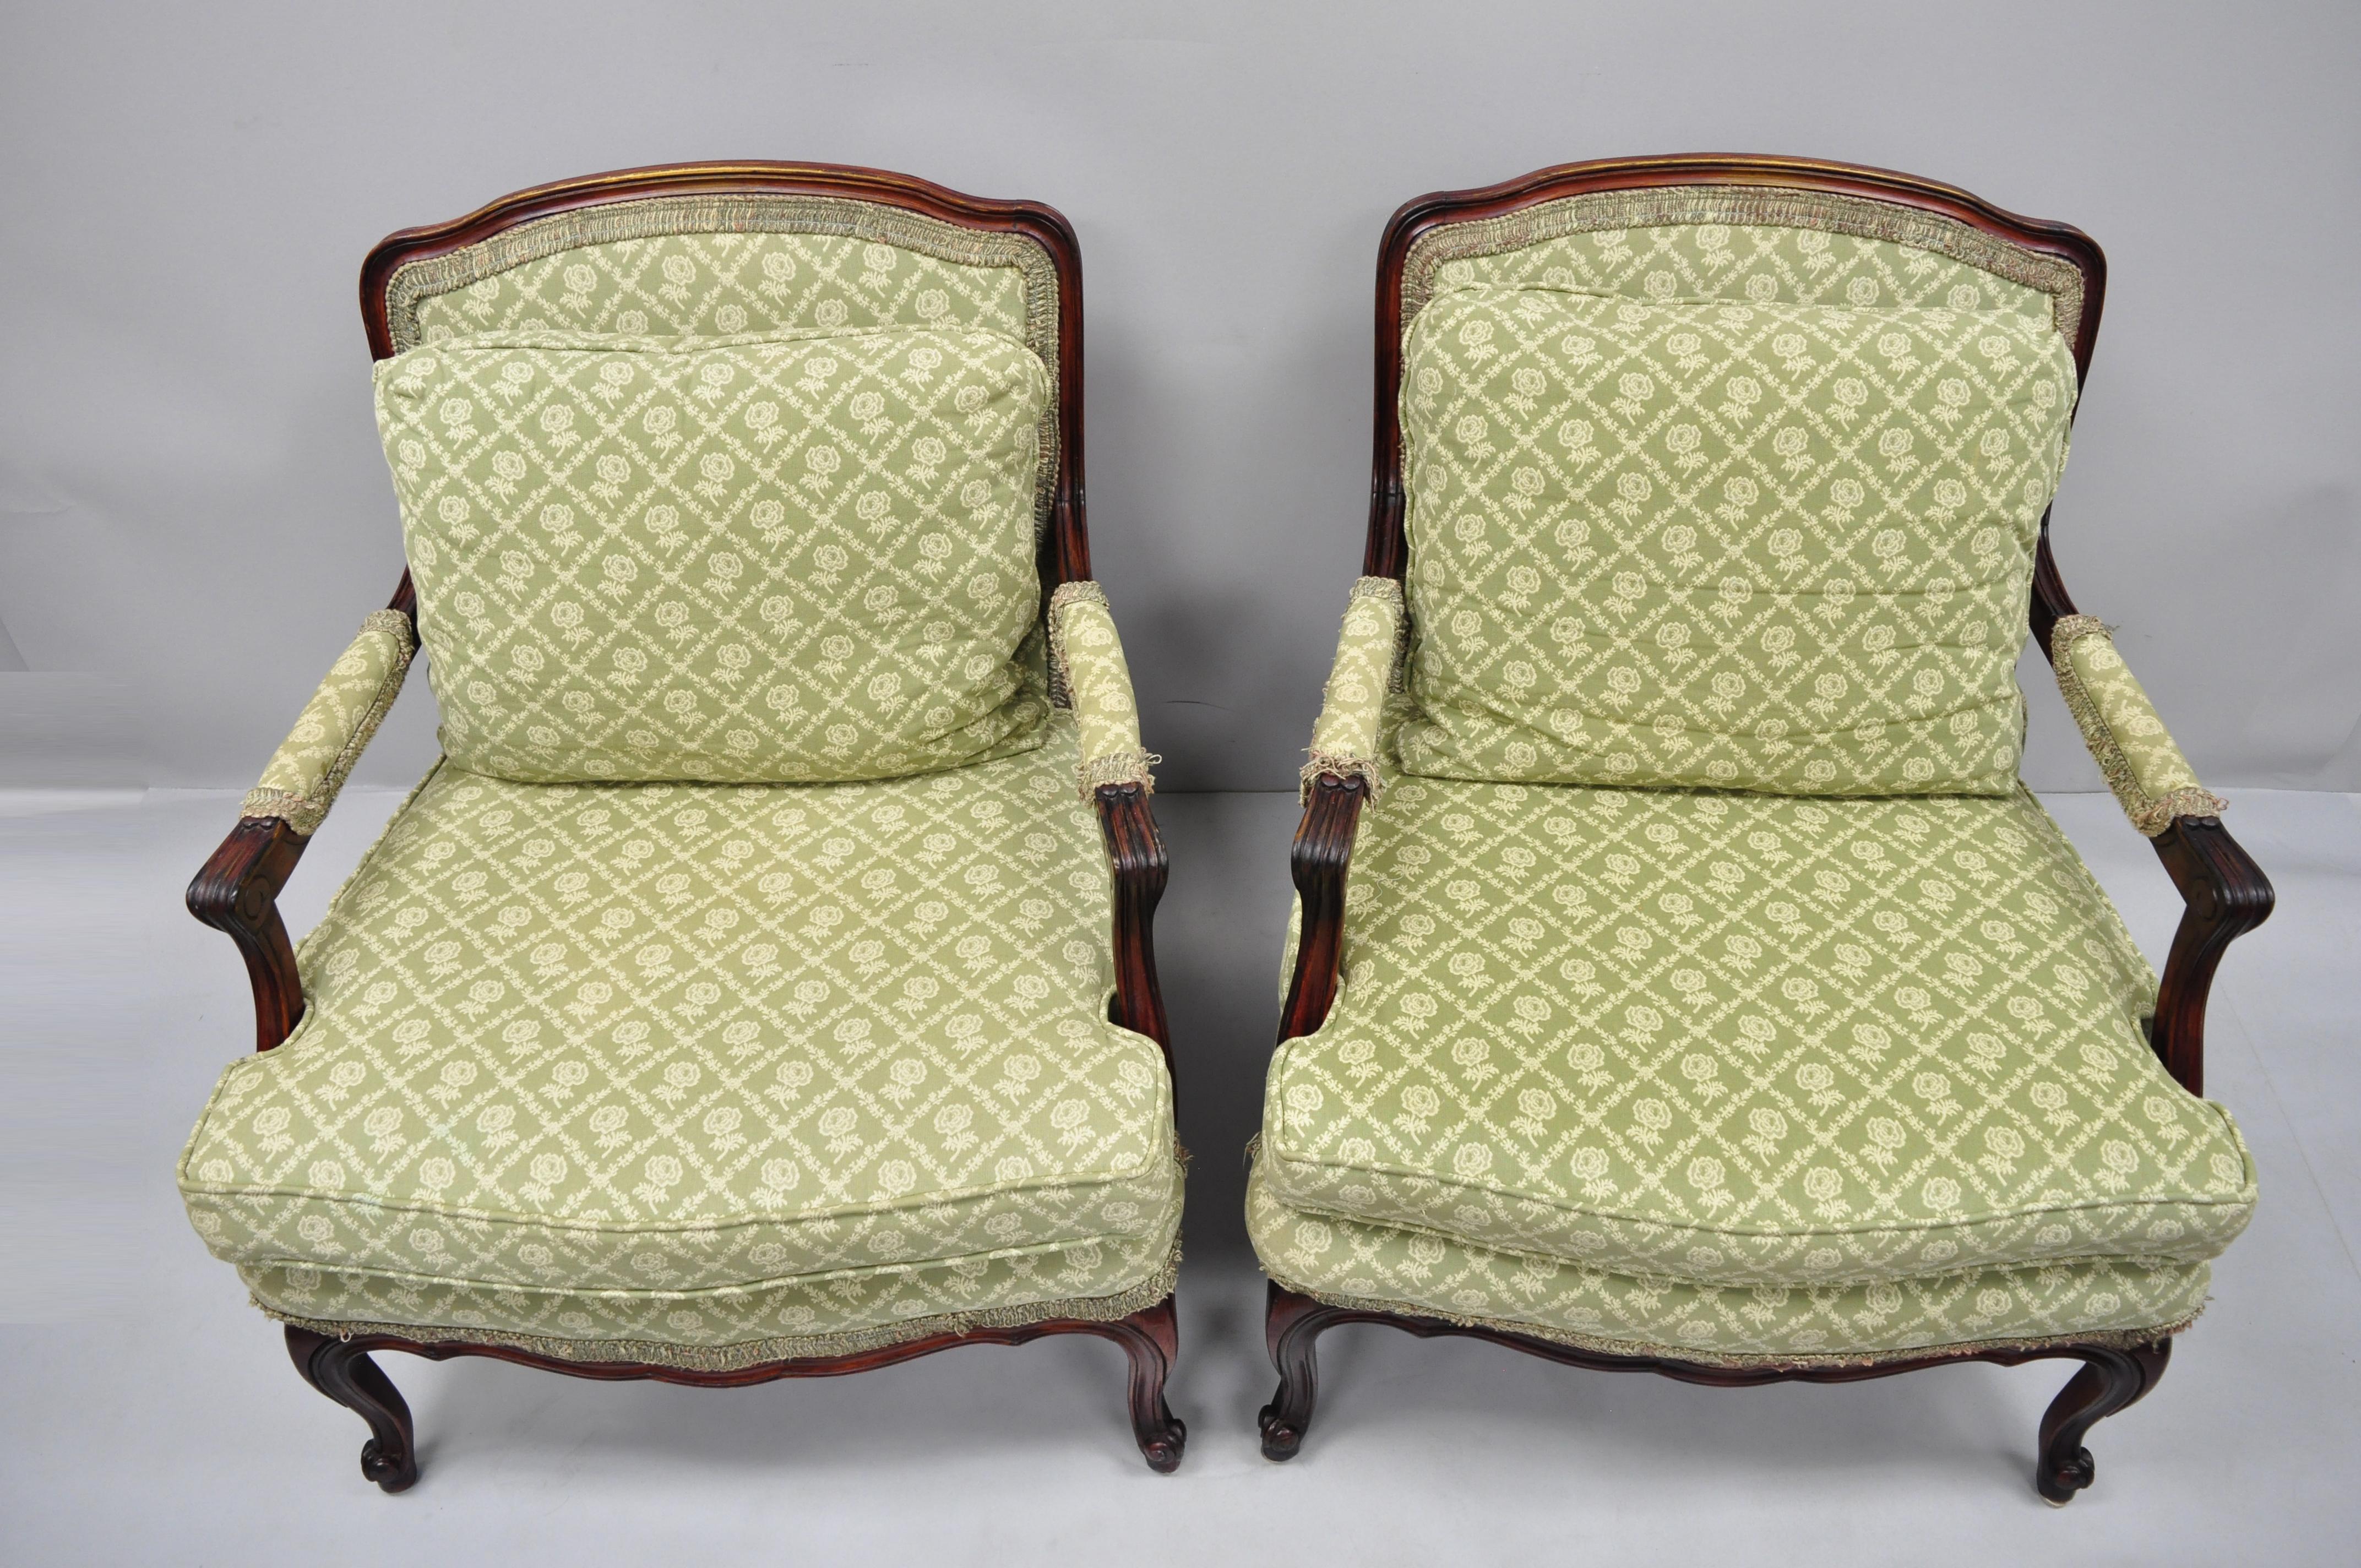 Pair of French Country Louis XV Style Mahogany Bergere Chairs Armchairs (Louis XV.)